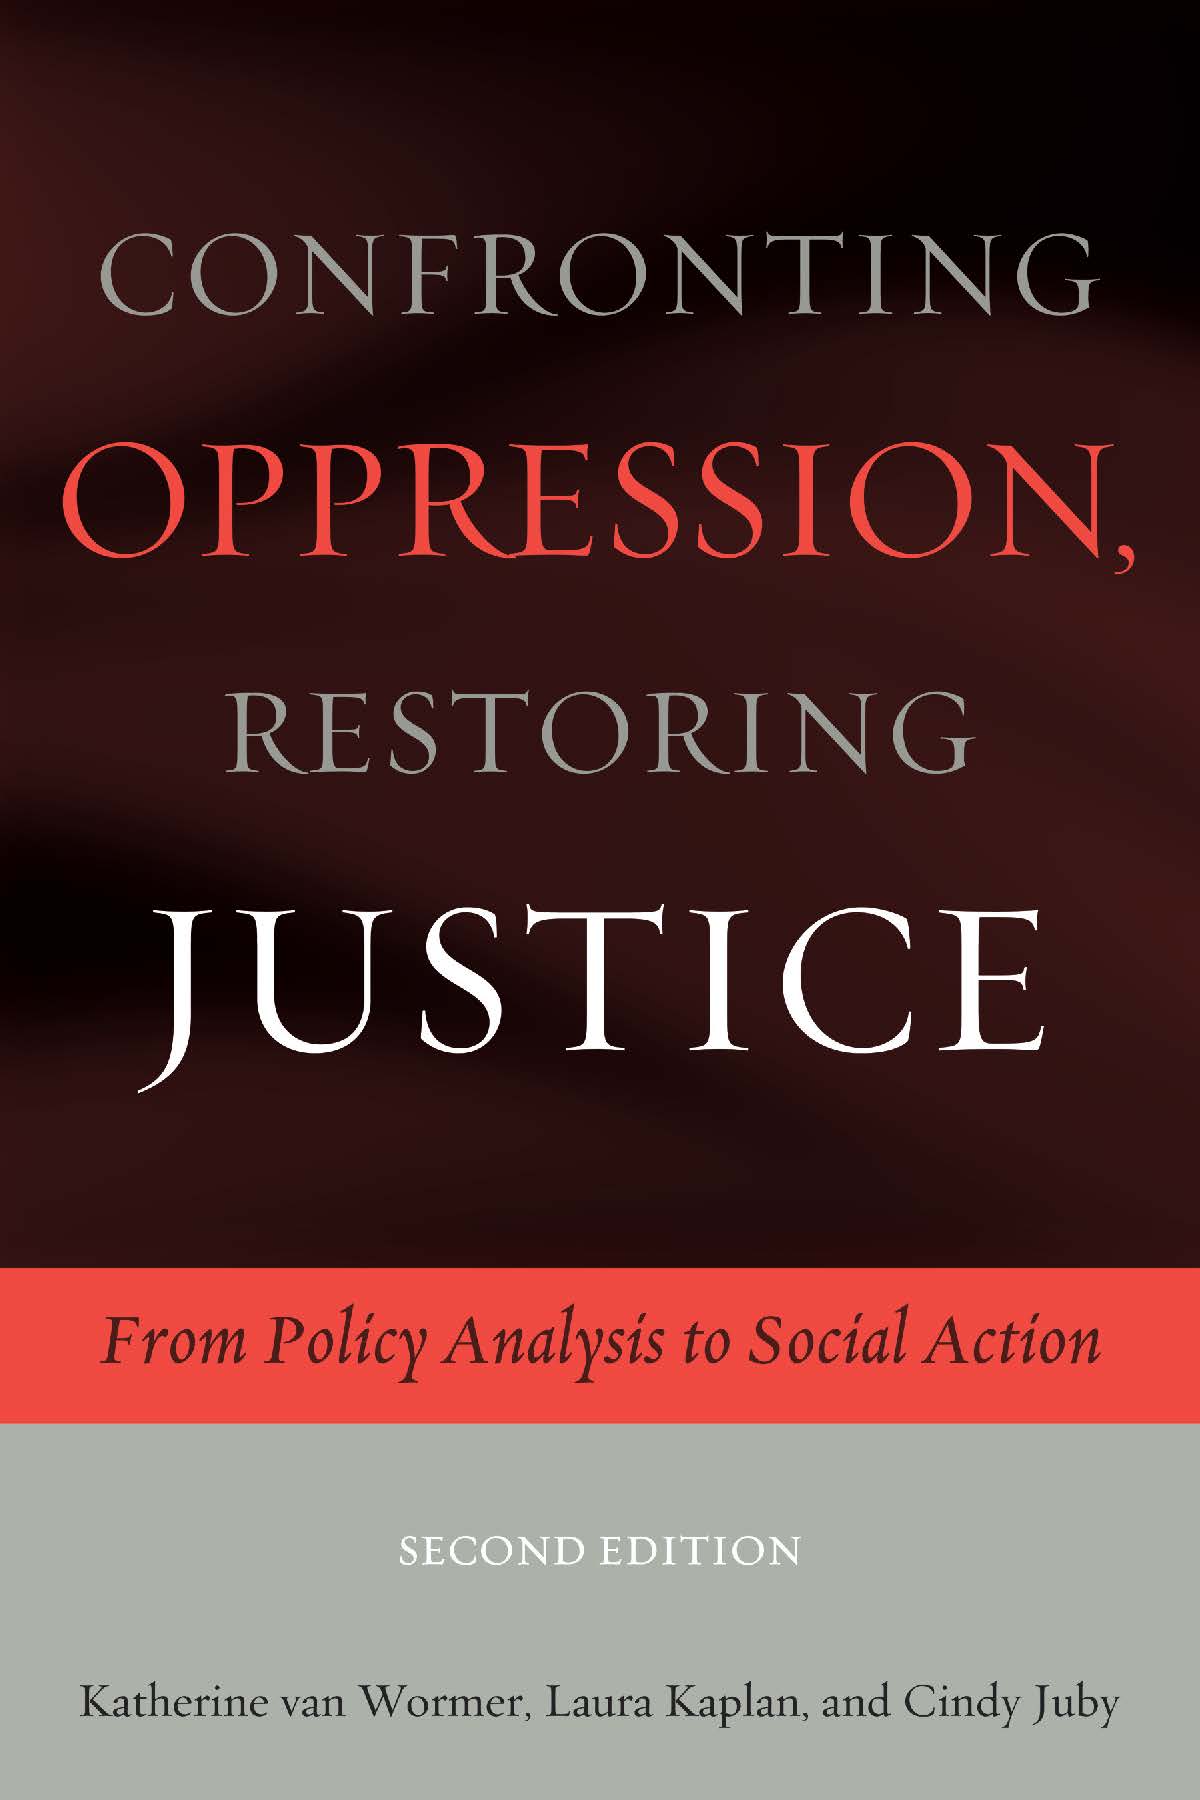 Confronting Oppression, Restoring Justice: From Policy Analysis to Social Action, 2nd edition